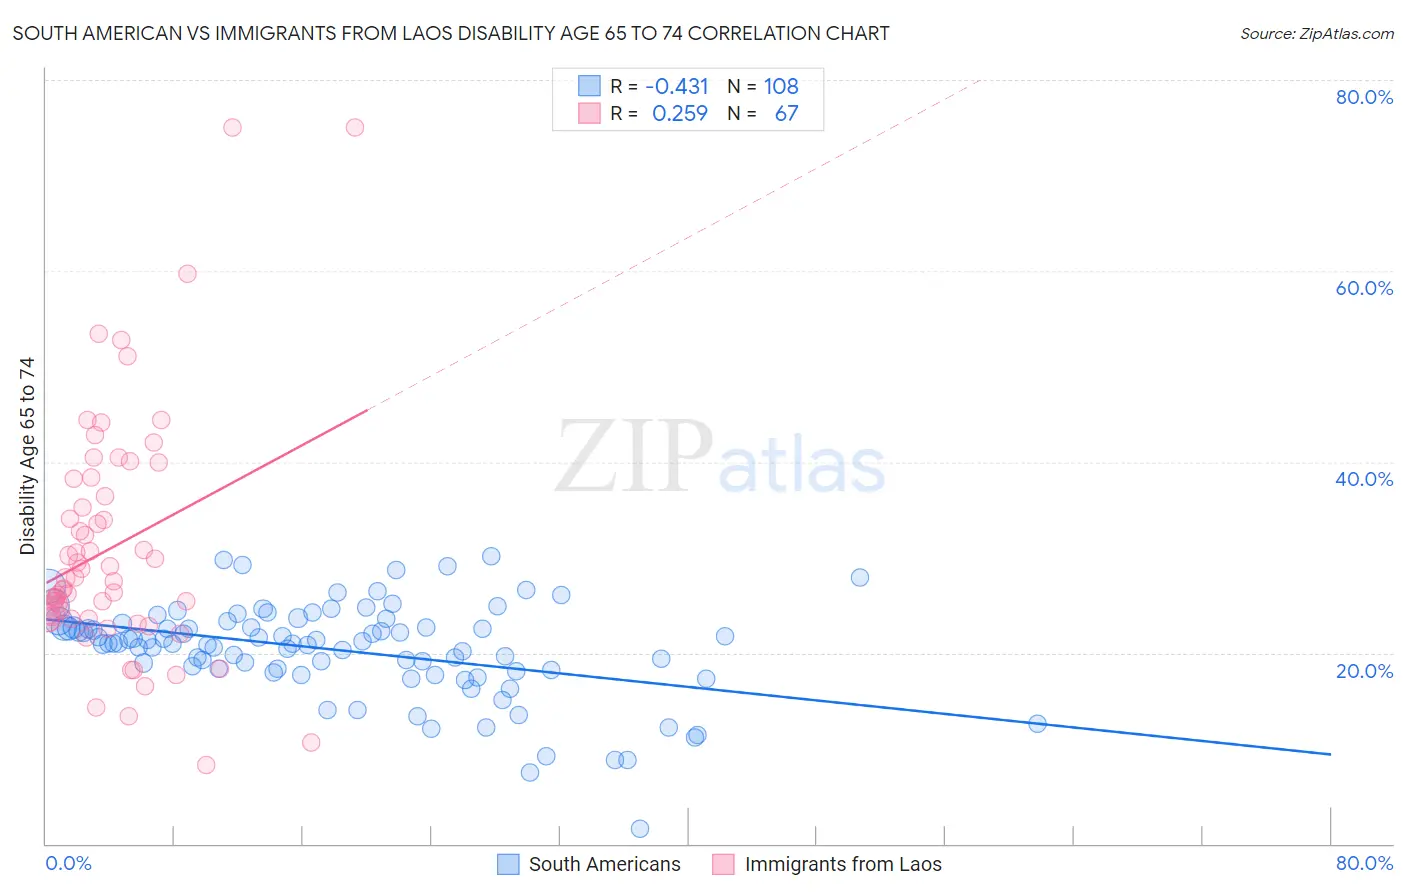 South American vs Immigrants from Laos Disability Age 65 to 74